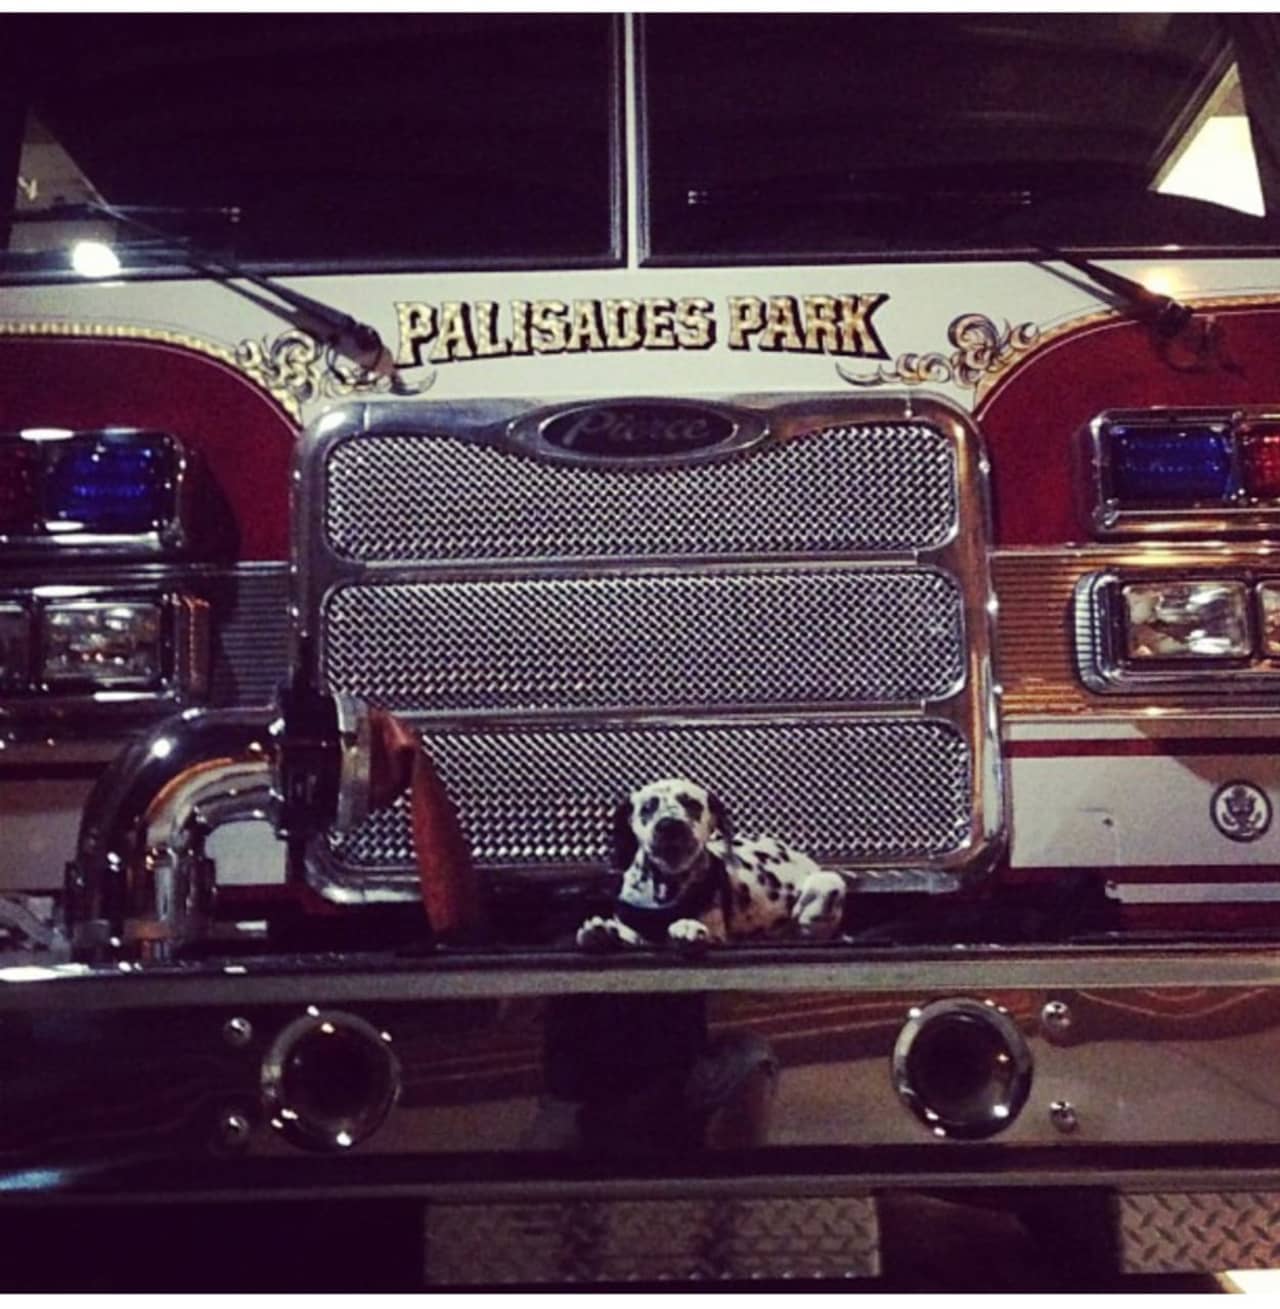 Sarge takes a break on a Palisades Park fire engine.